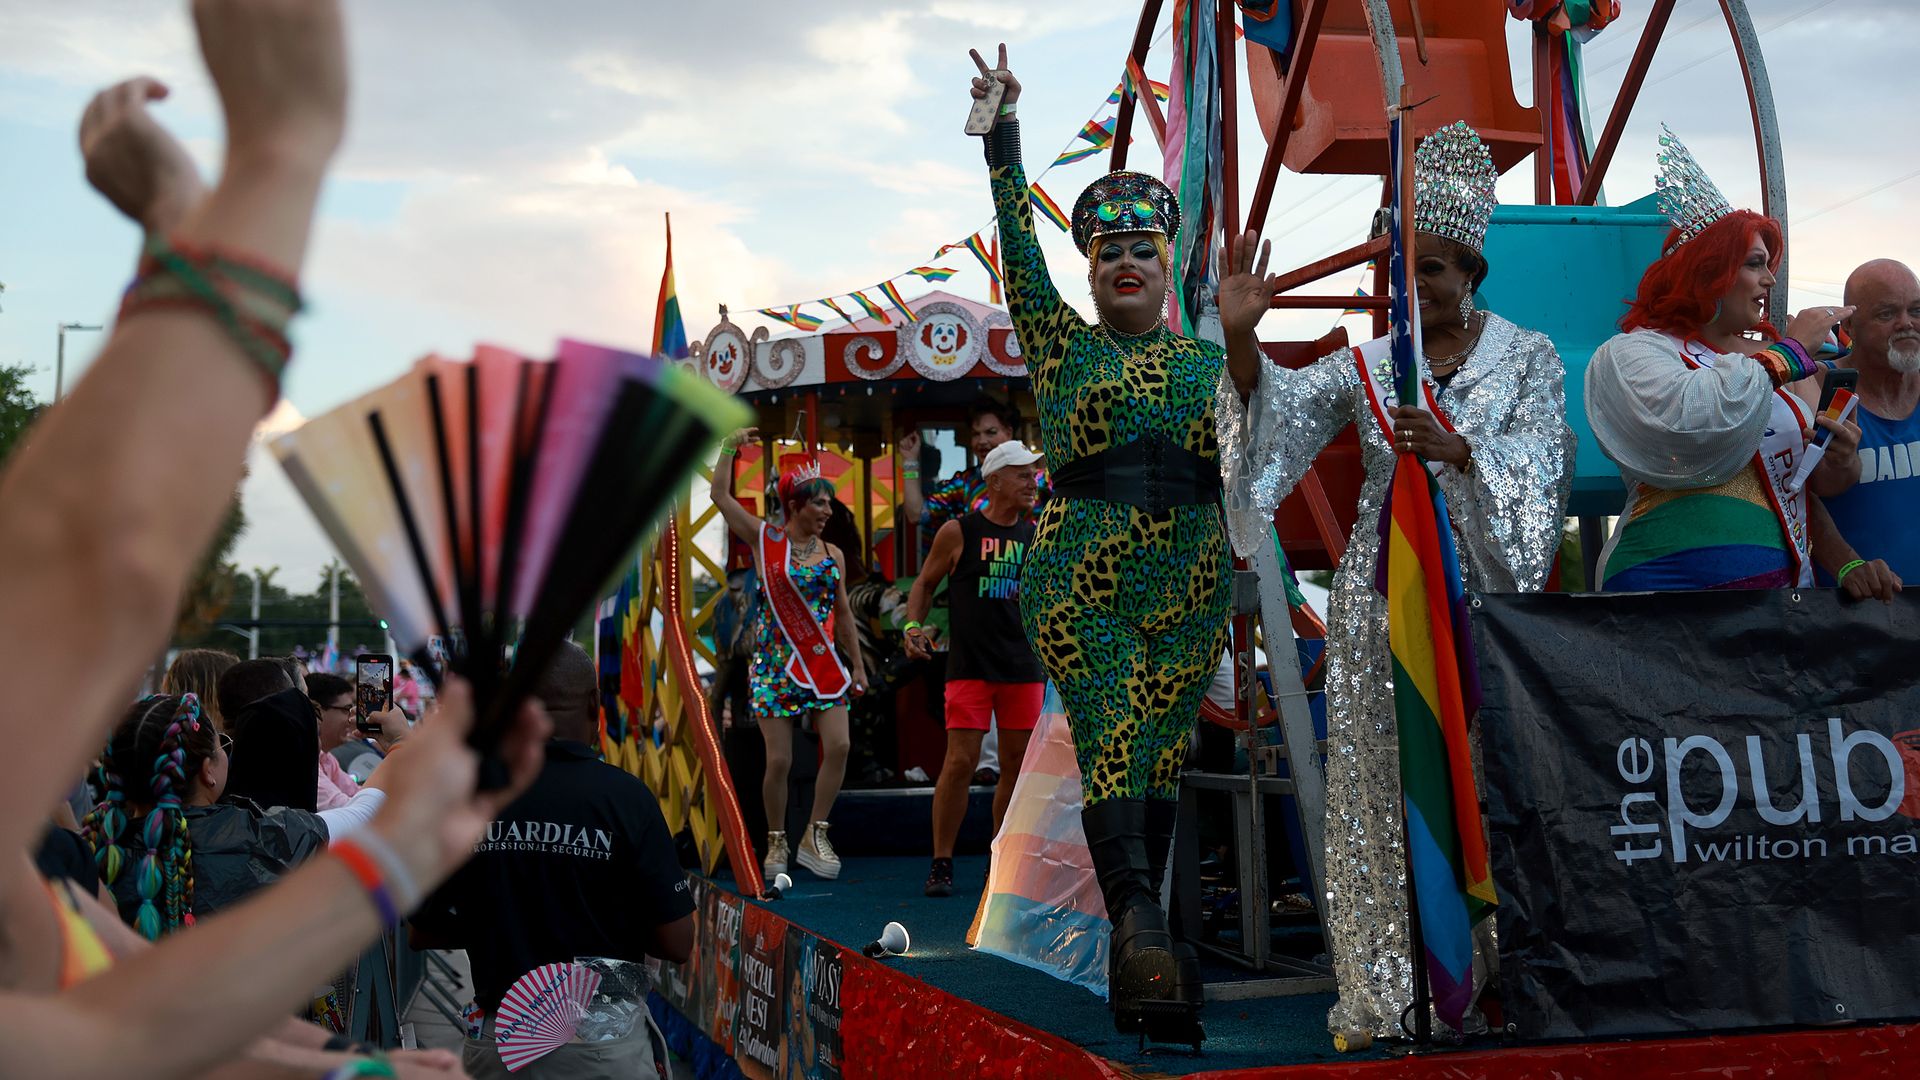 A drag performer makes a peace sign from a float in a parade